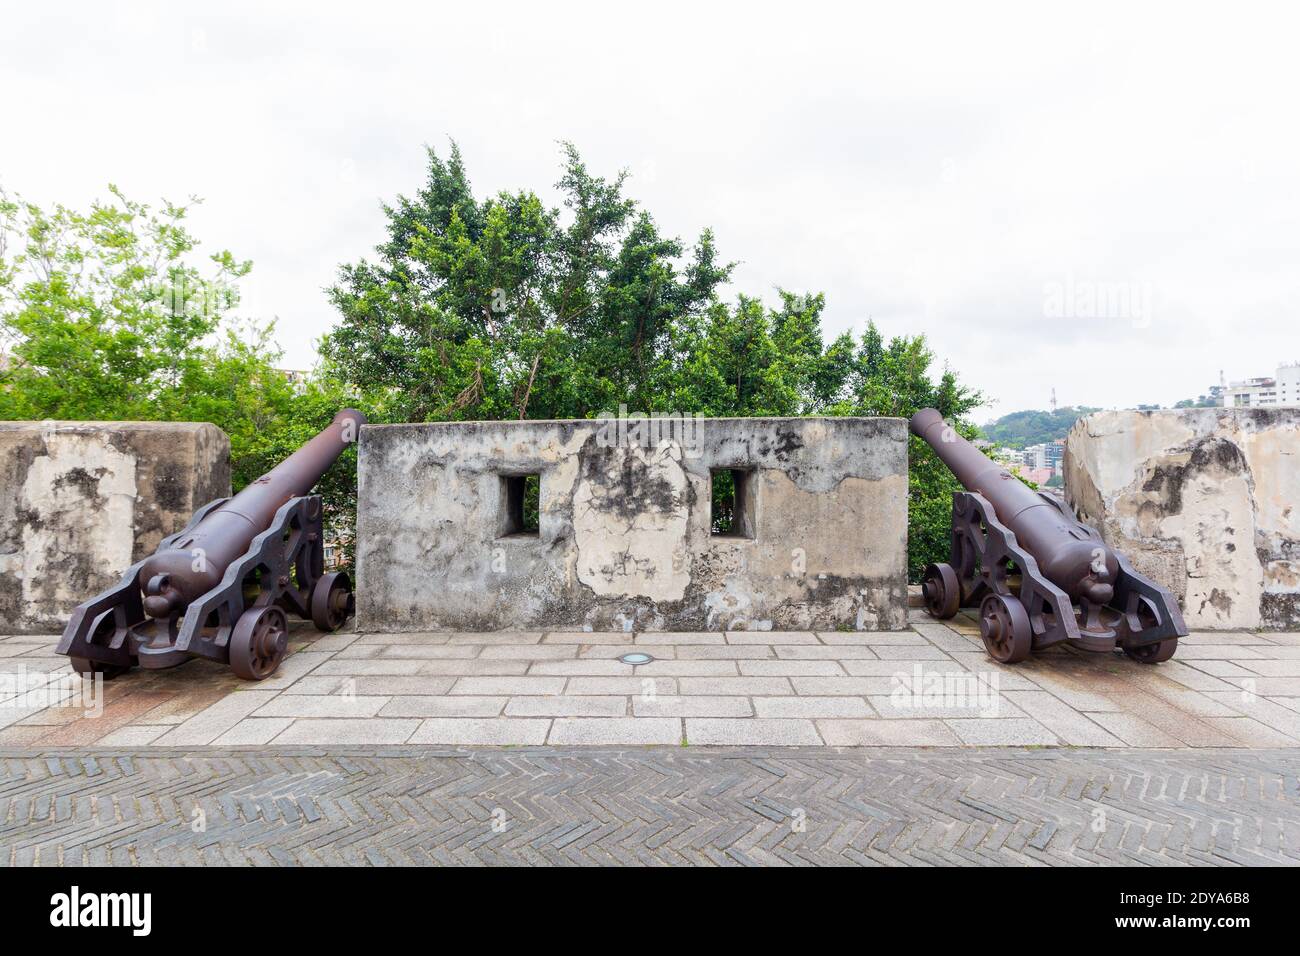 The historic Monte Fort in Macau, China Stock Photo